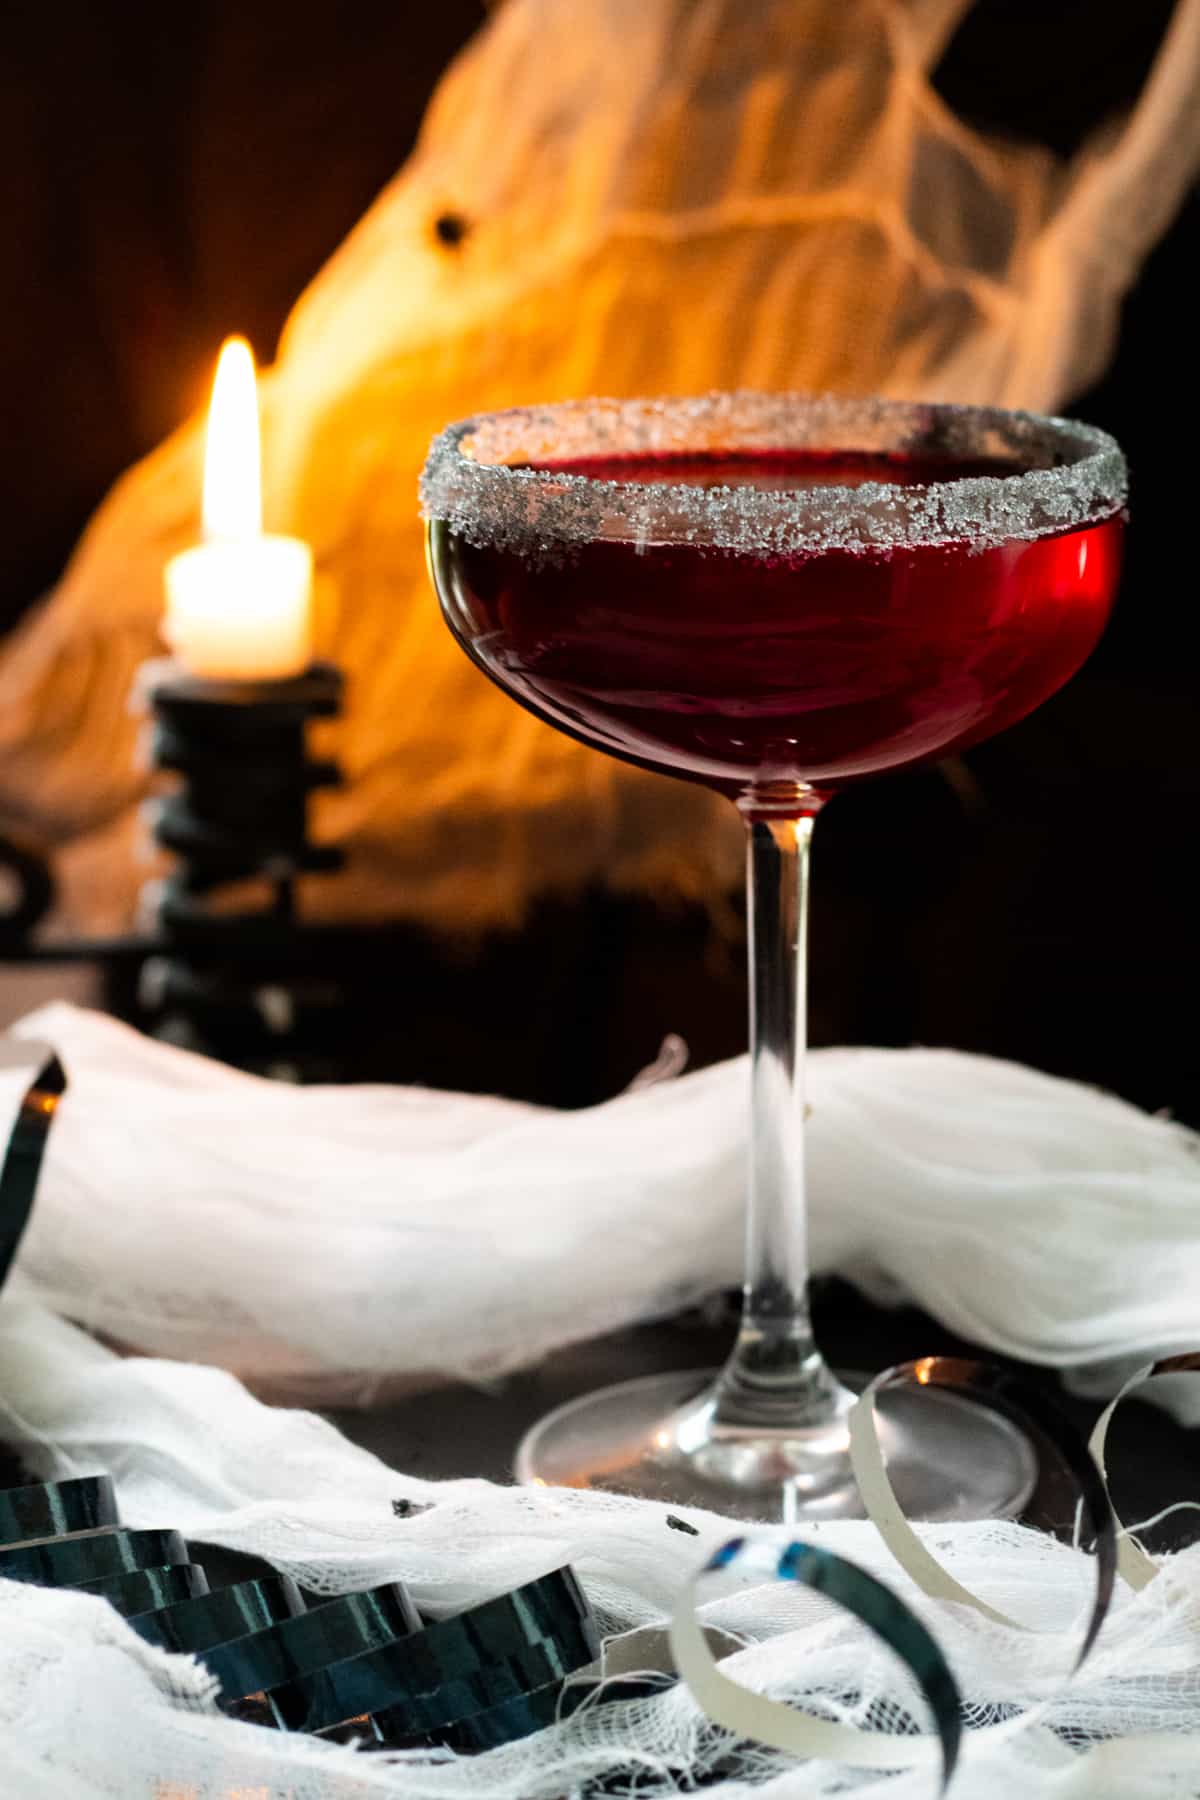 vampire margarita with a candle and cob webs in the background